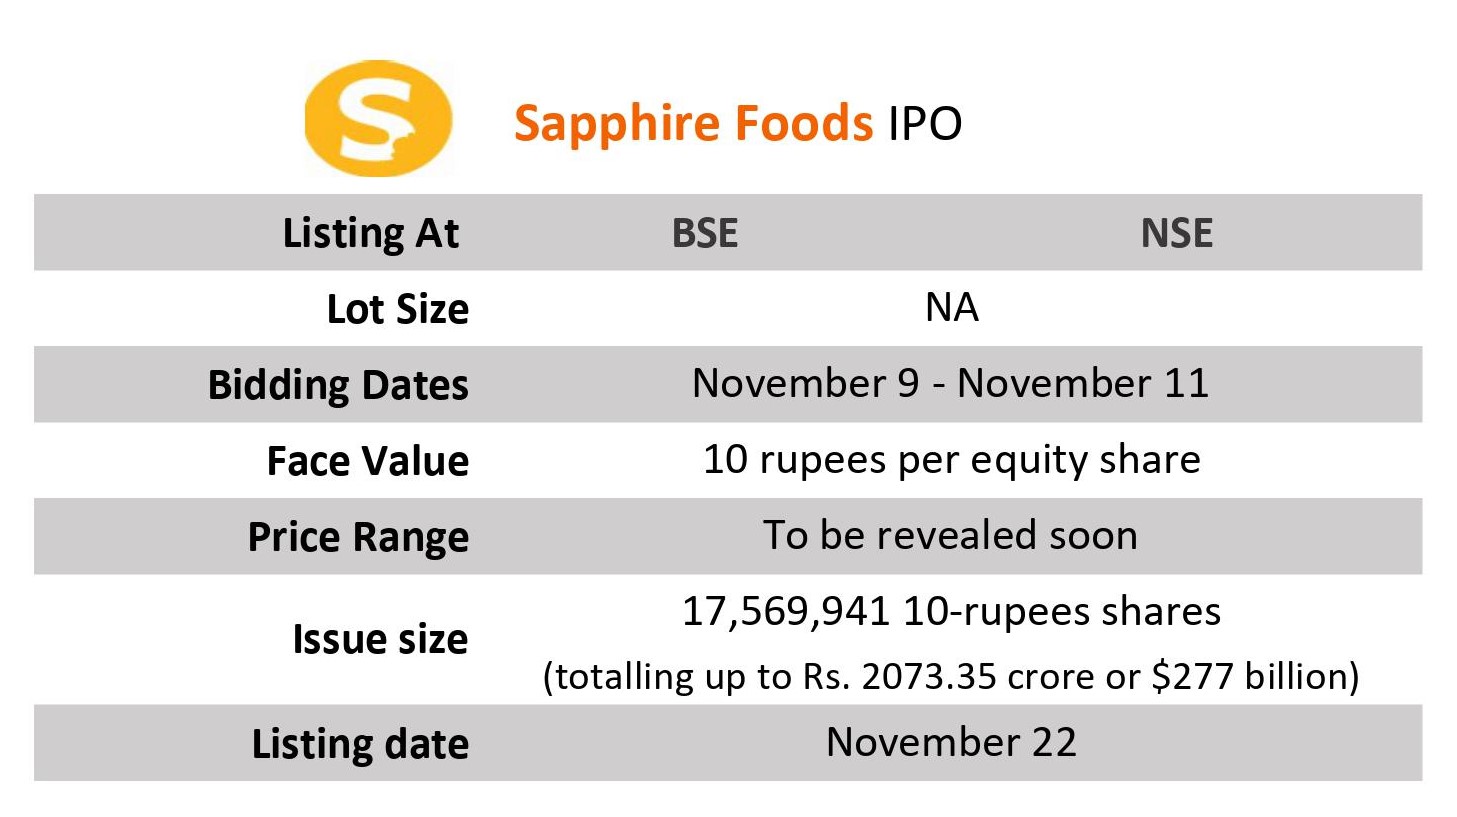 Sapphire Foods IPO details